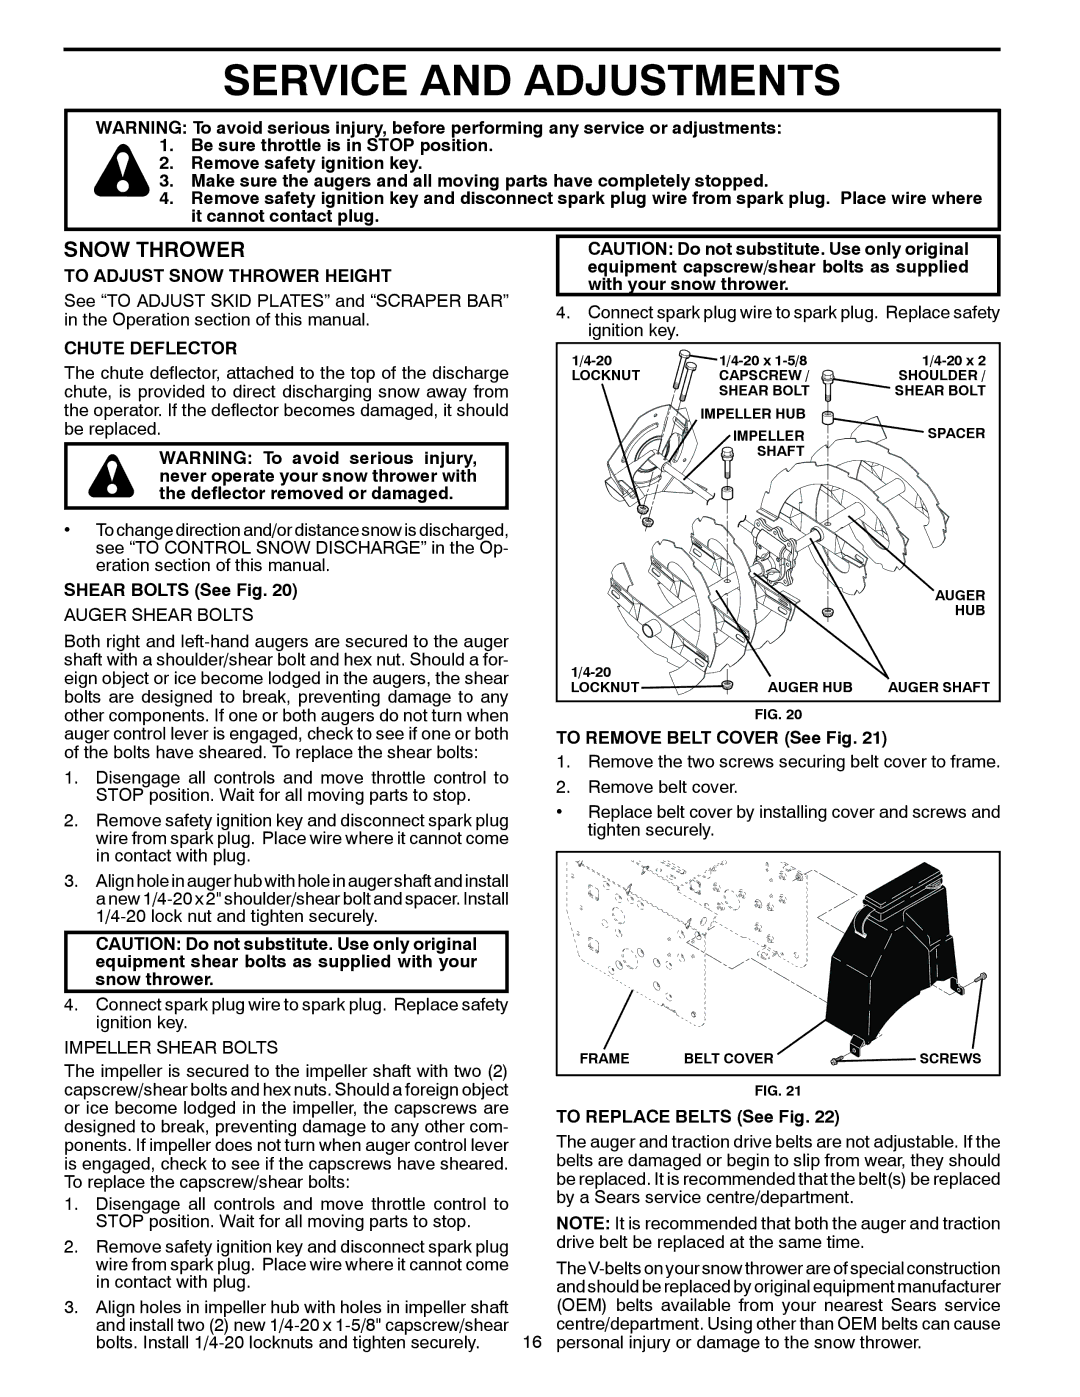 Poulan 96192001803 owner manual Service and Adjustments, To Adjust Snow Thrower Height, Chute Deflector 